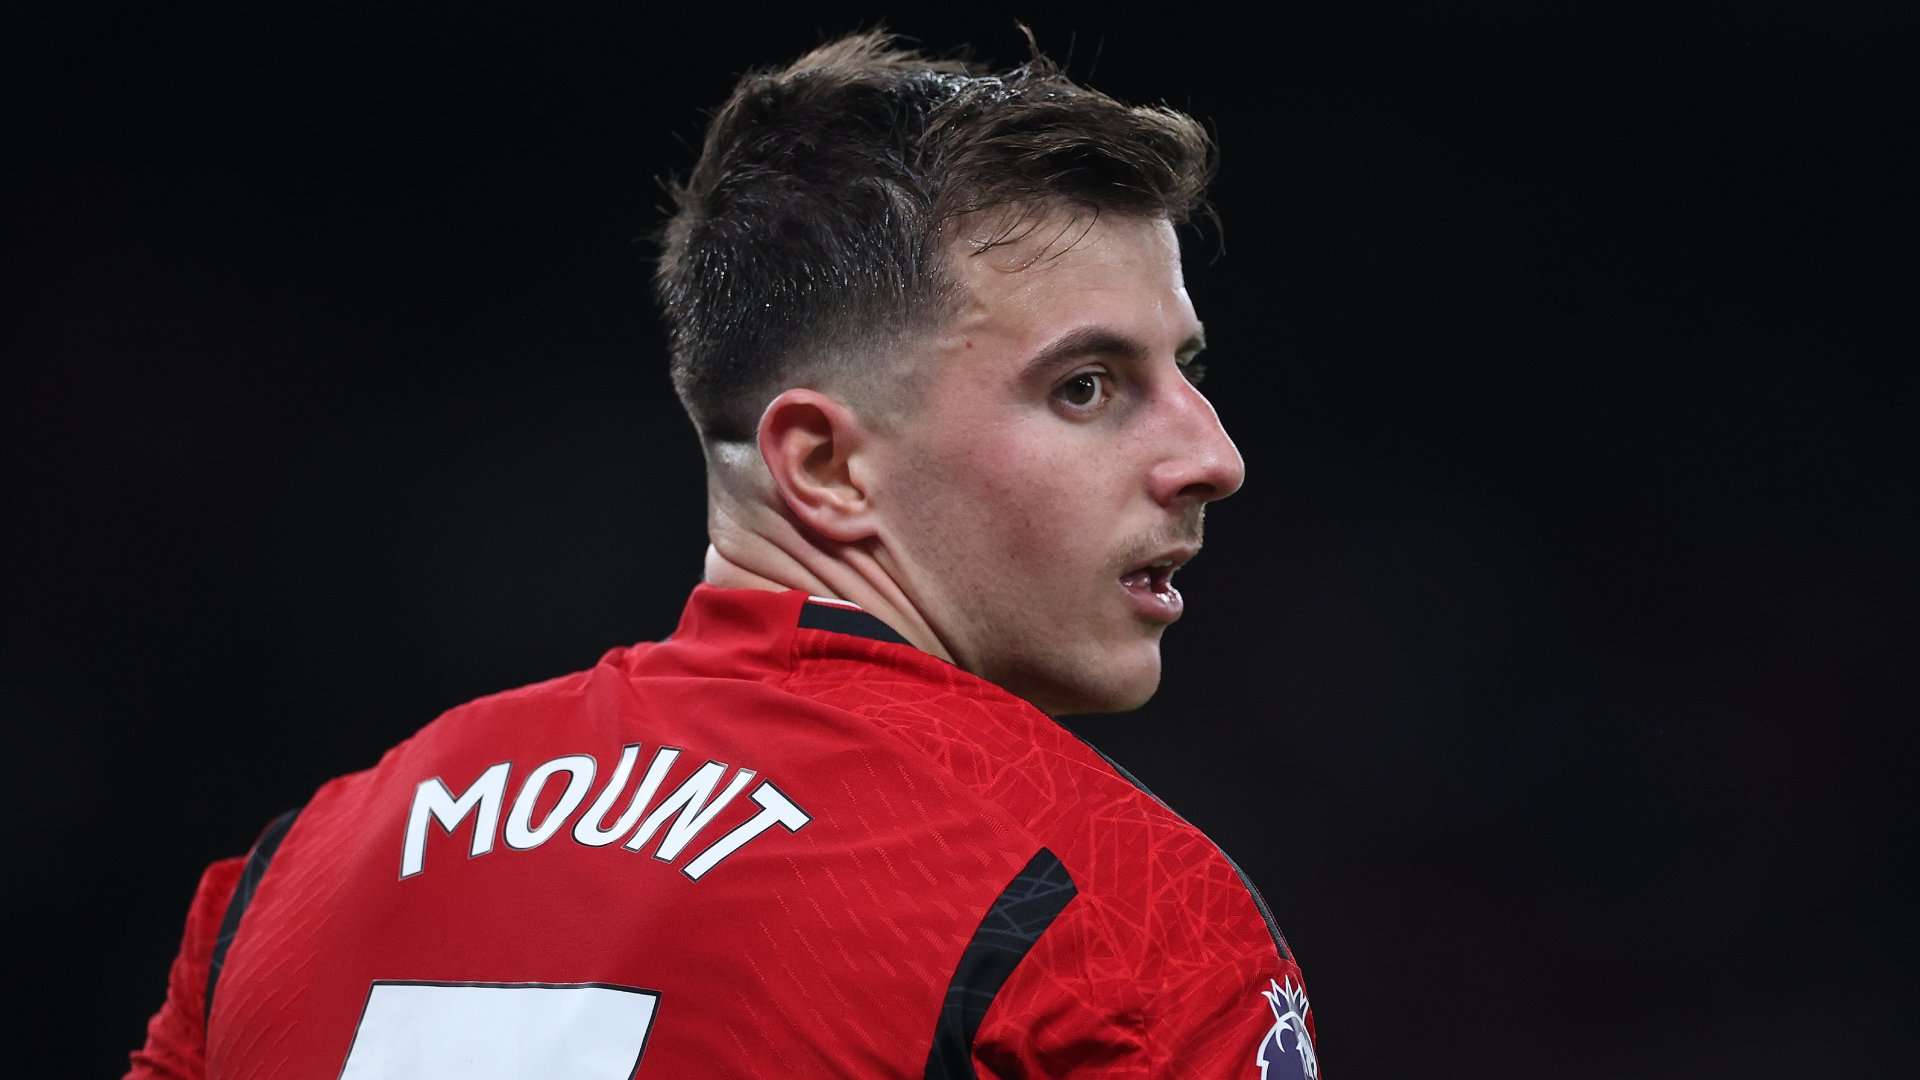 Mason Mount has not been it at Manchester United SO FAR.